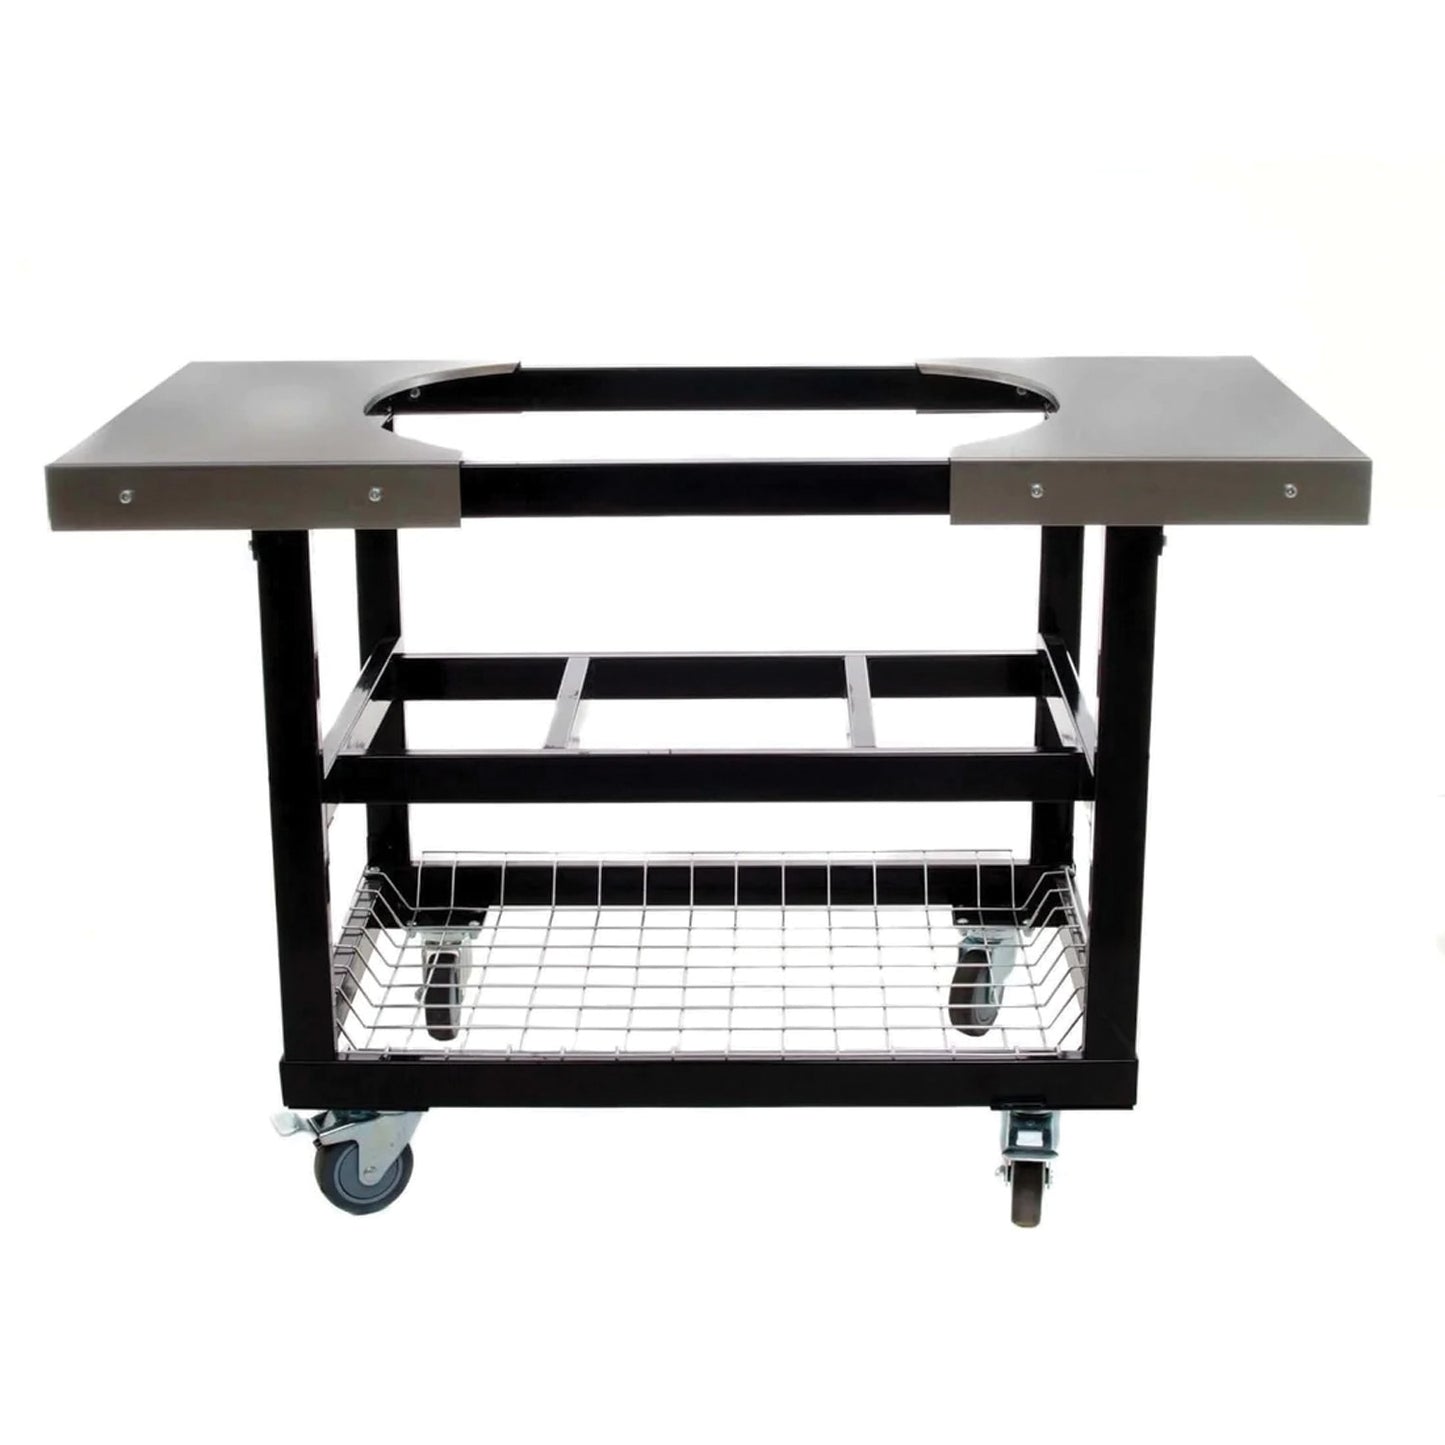 Cart Base with Basket and Stainless Side Shelves